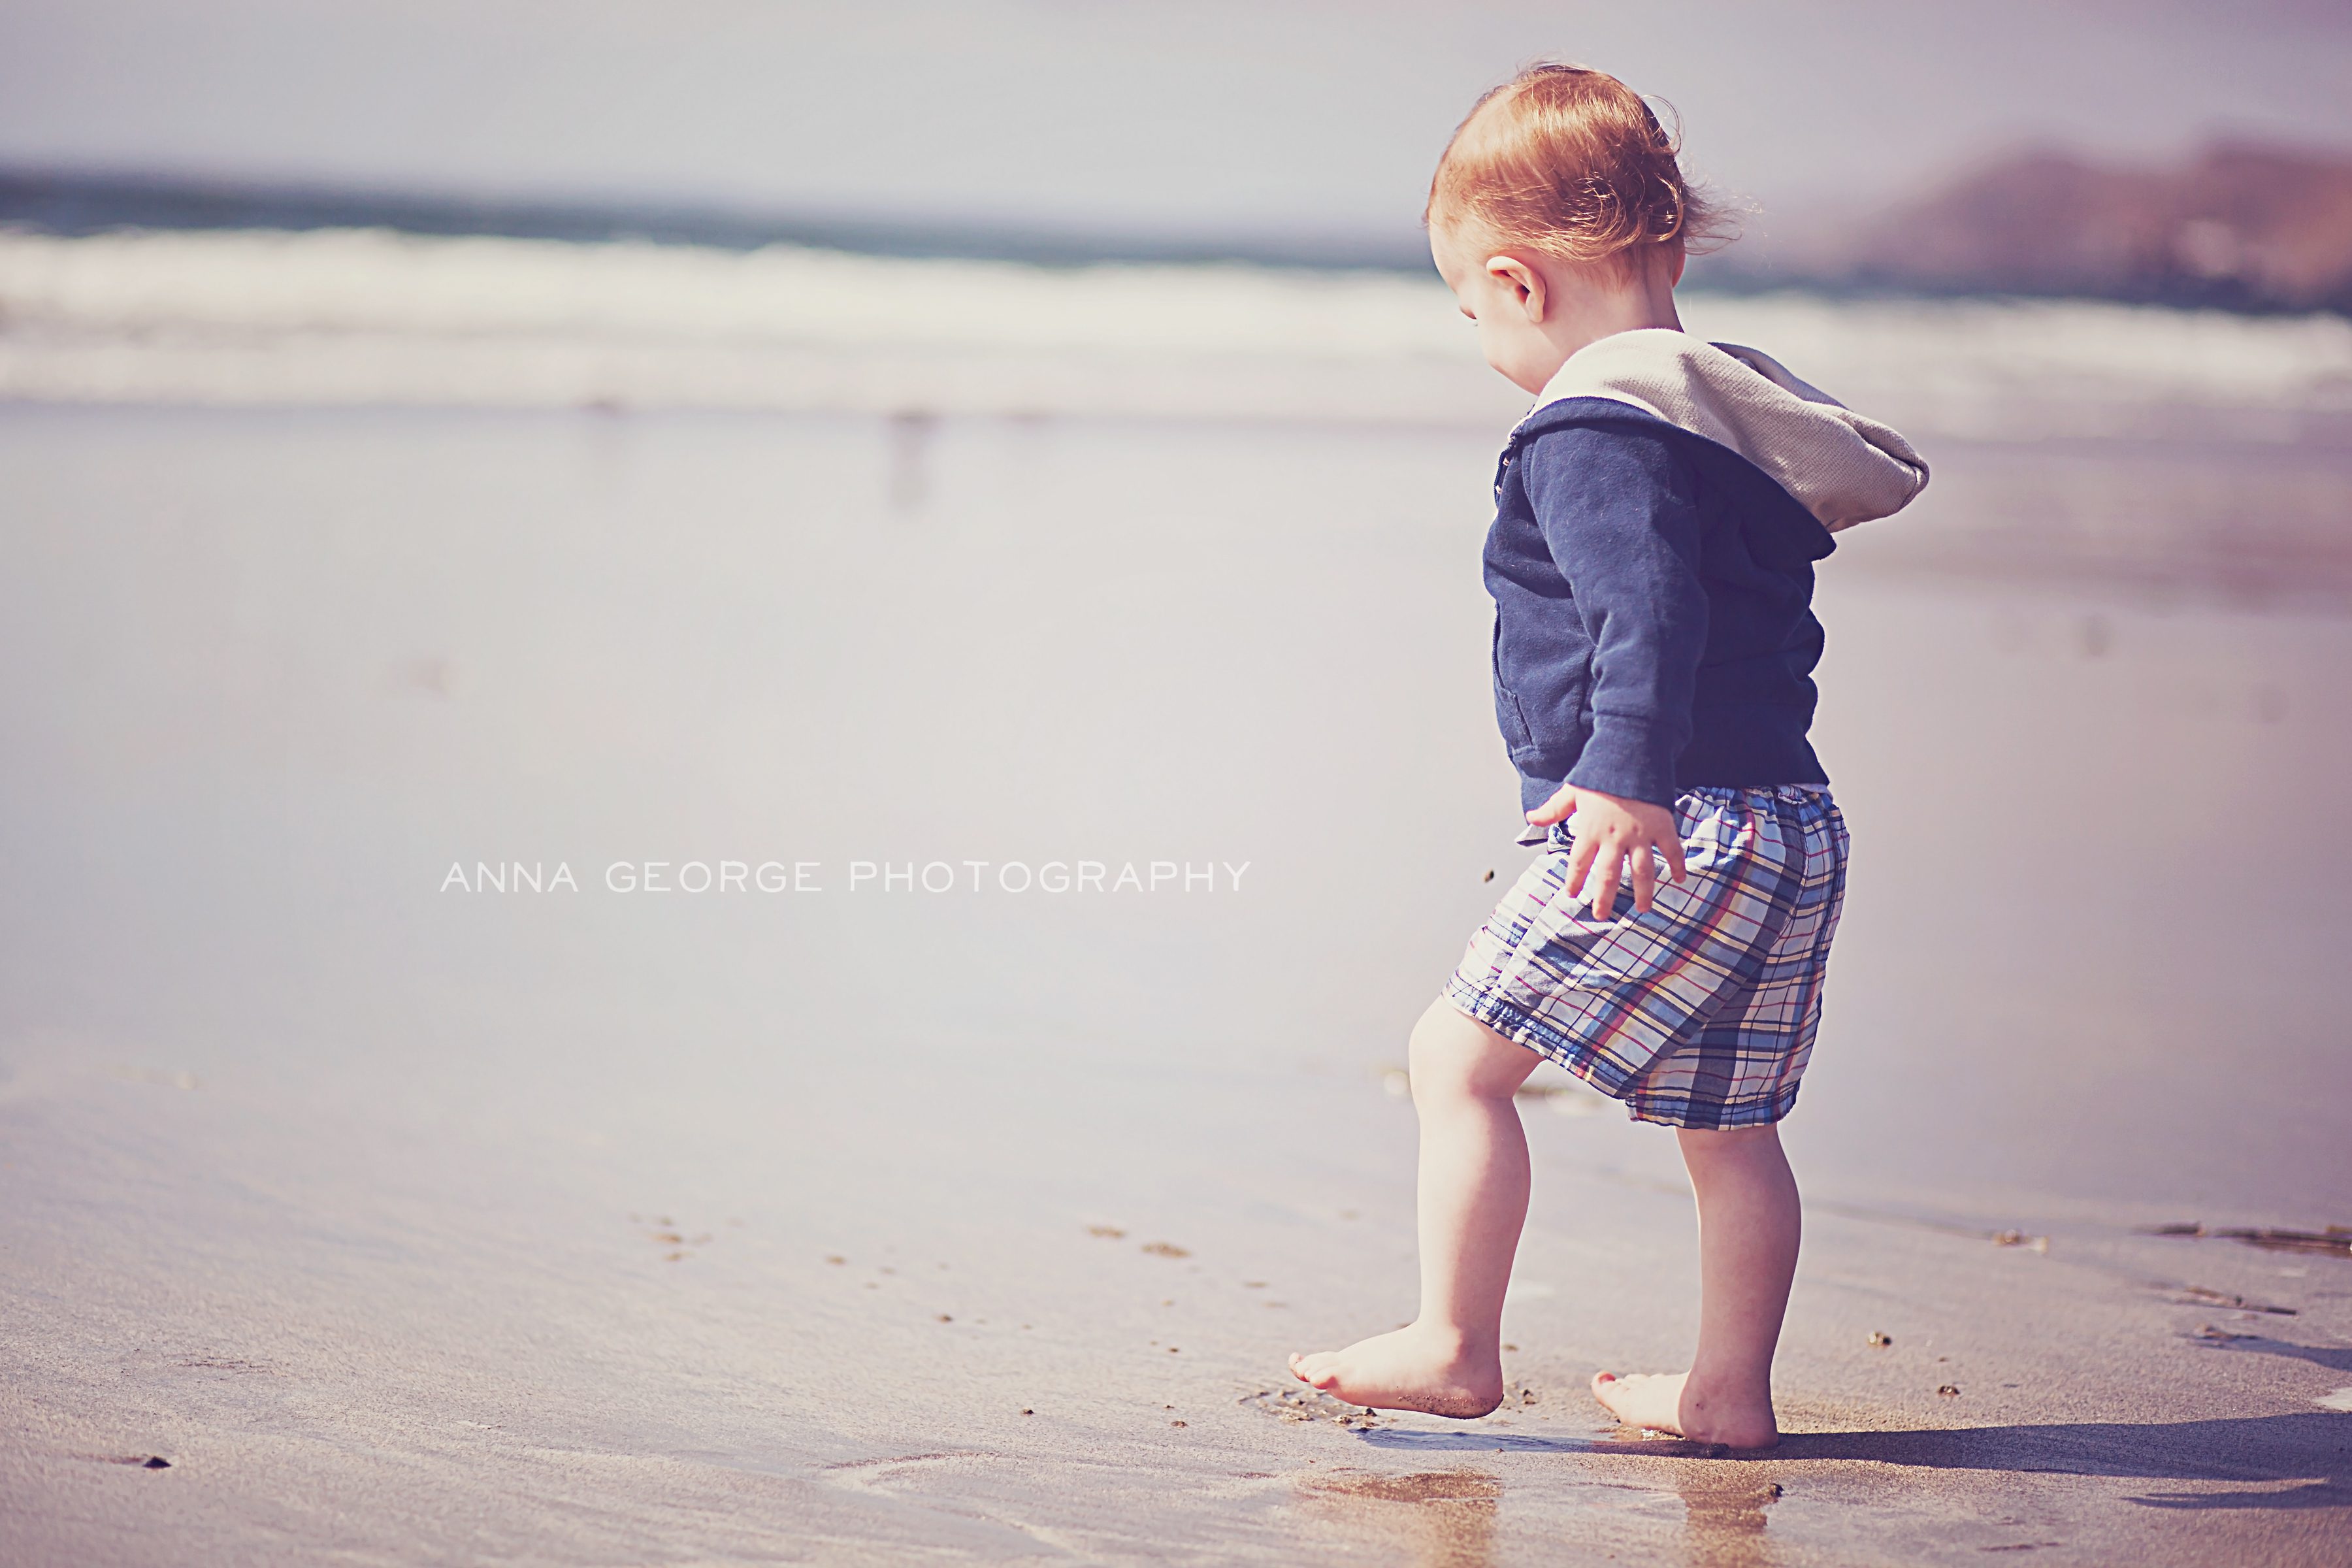 Madison WI family photographer - Anna George Photography - www.annageorgephoto.com